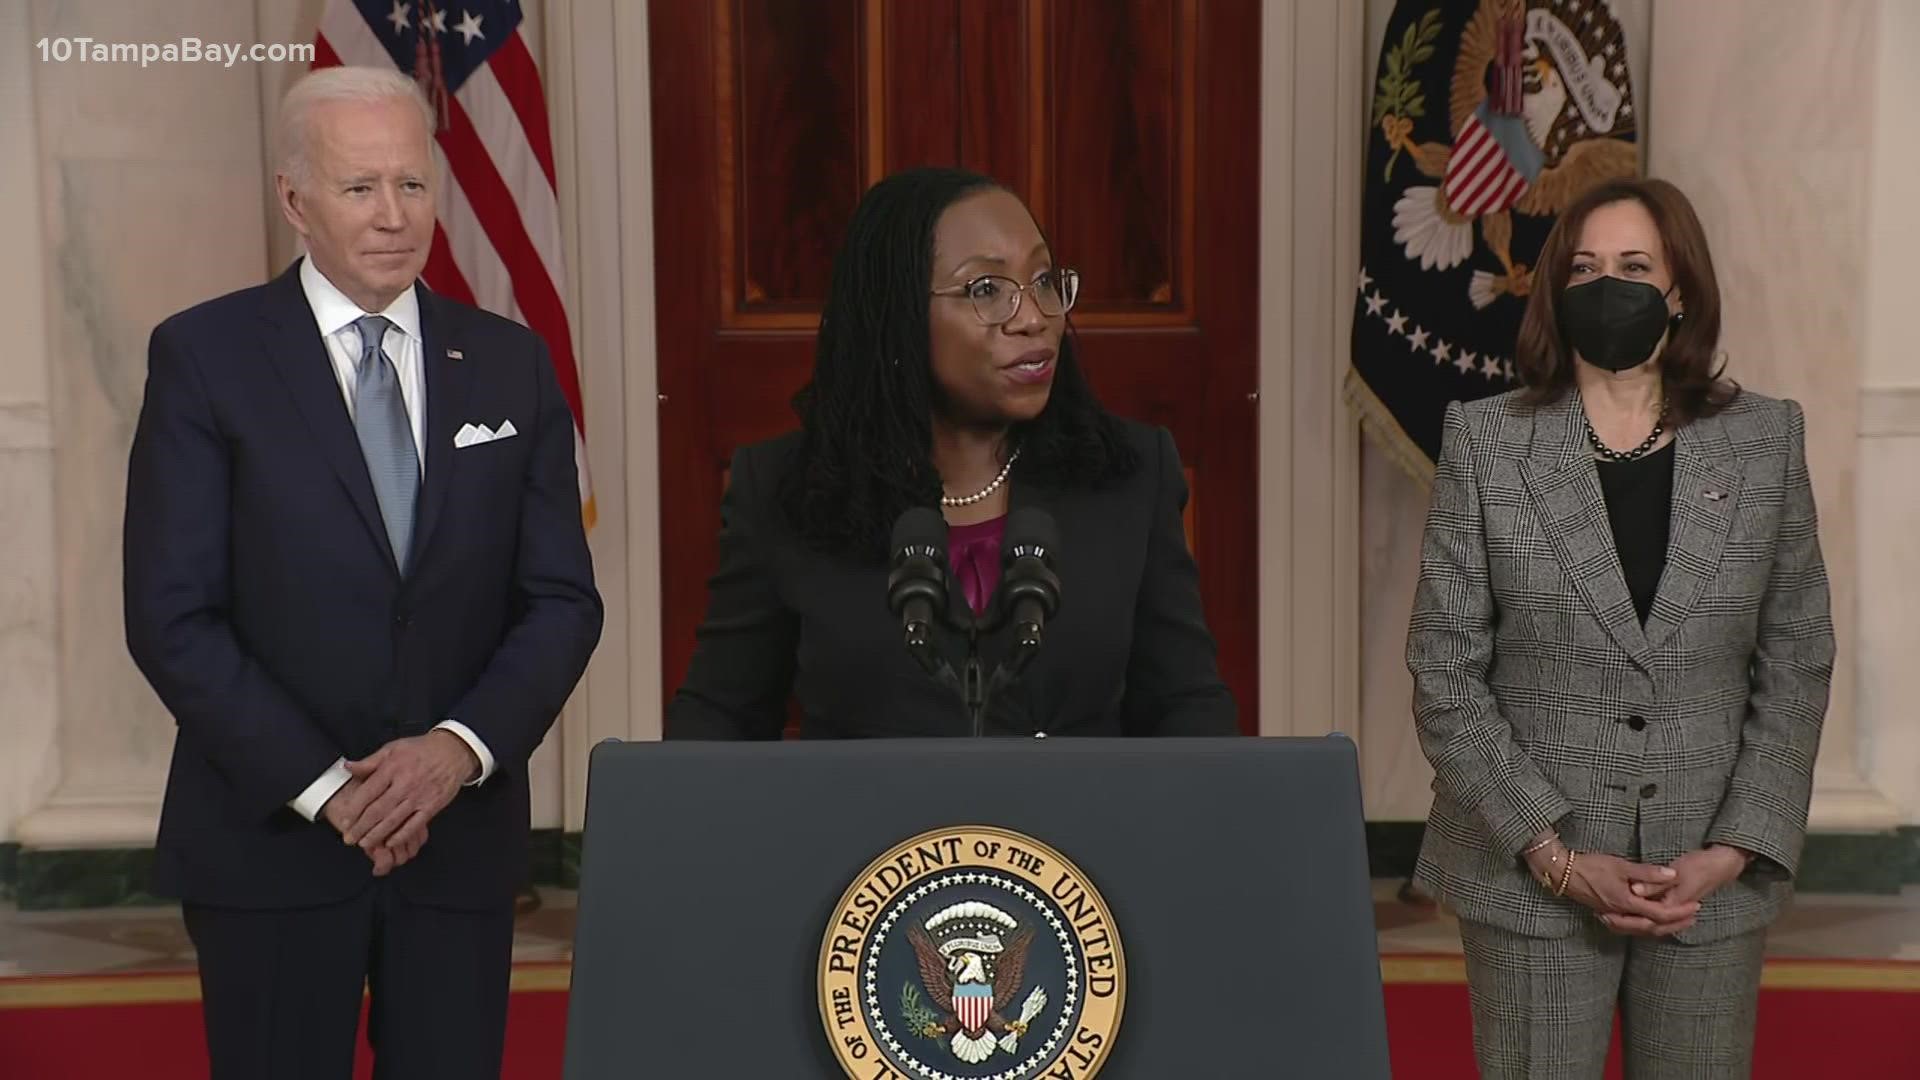 The White House introduced Jackson as Biden's Supreme Court nominee Friday.